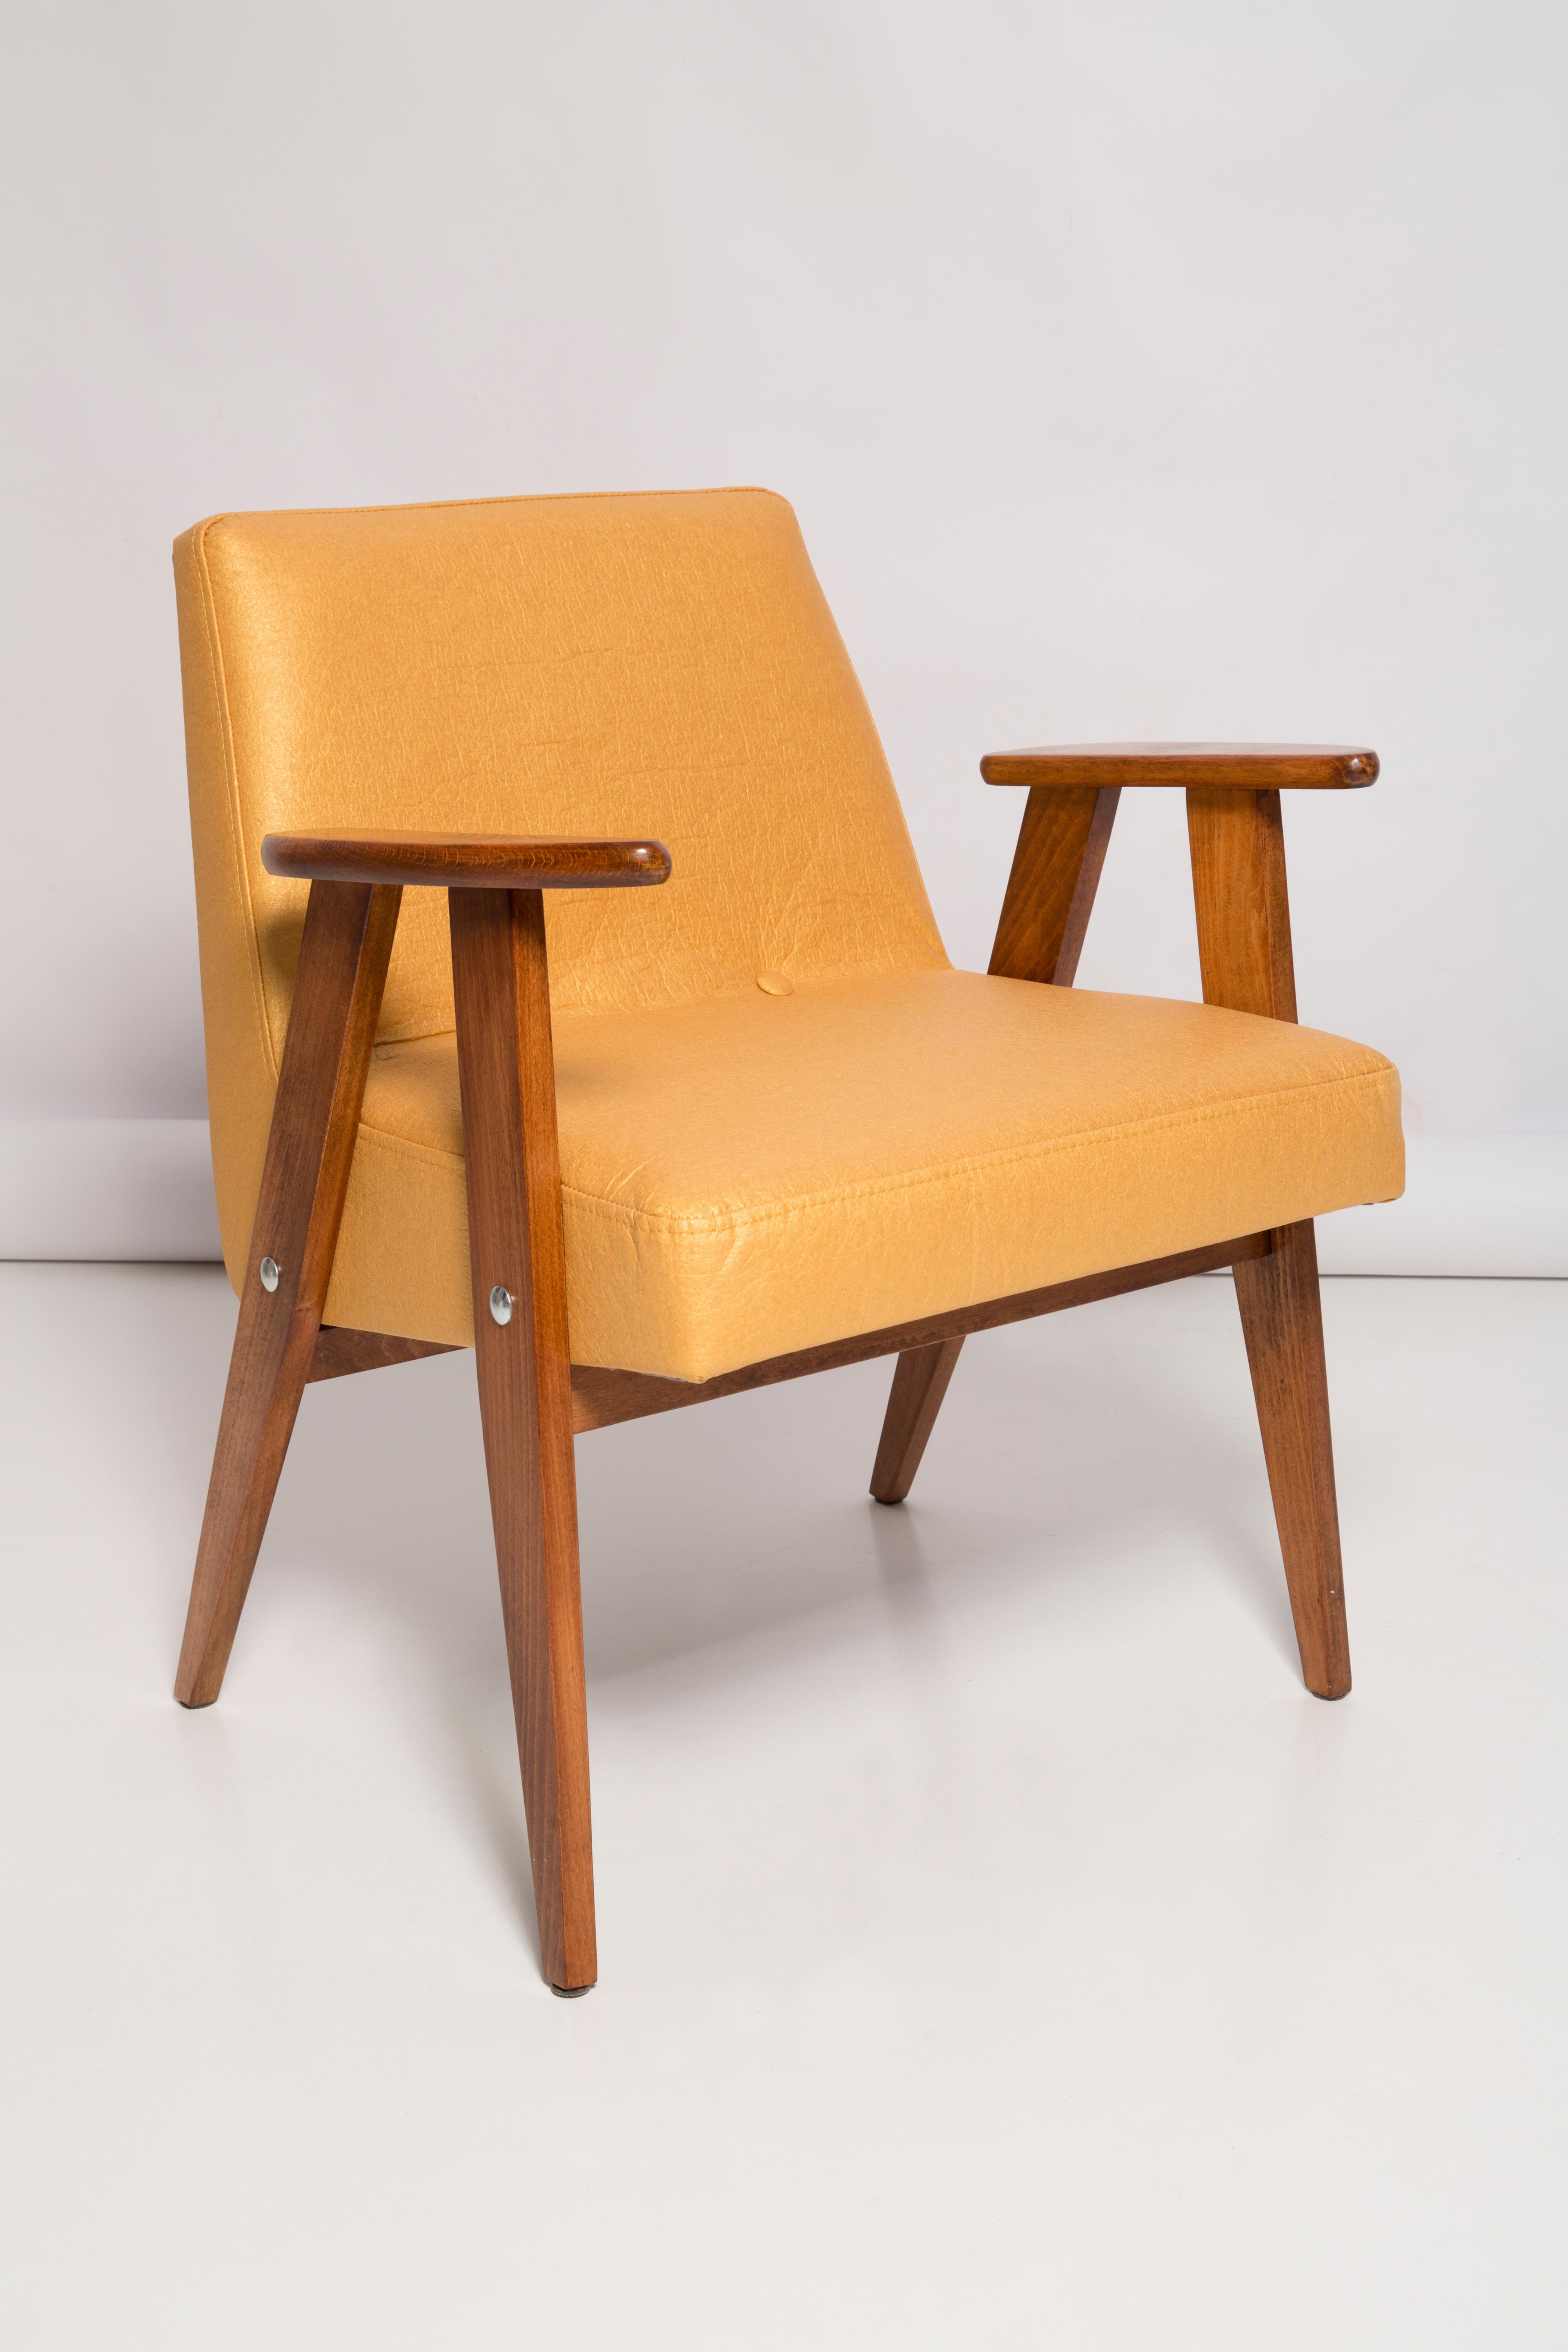 Mid-Century Modern Midcentury 366 Club Armchair in Gold Pineapple Leather, Jozef Chierowski, 1960s For Sale